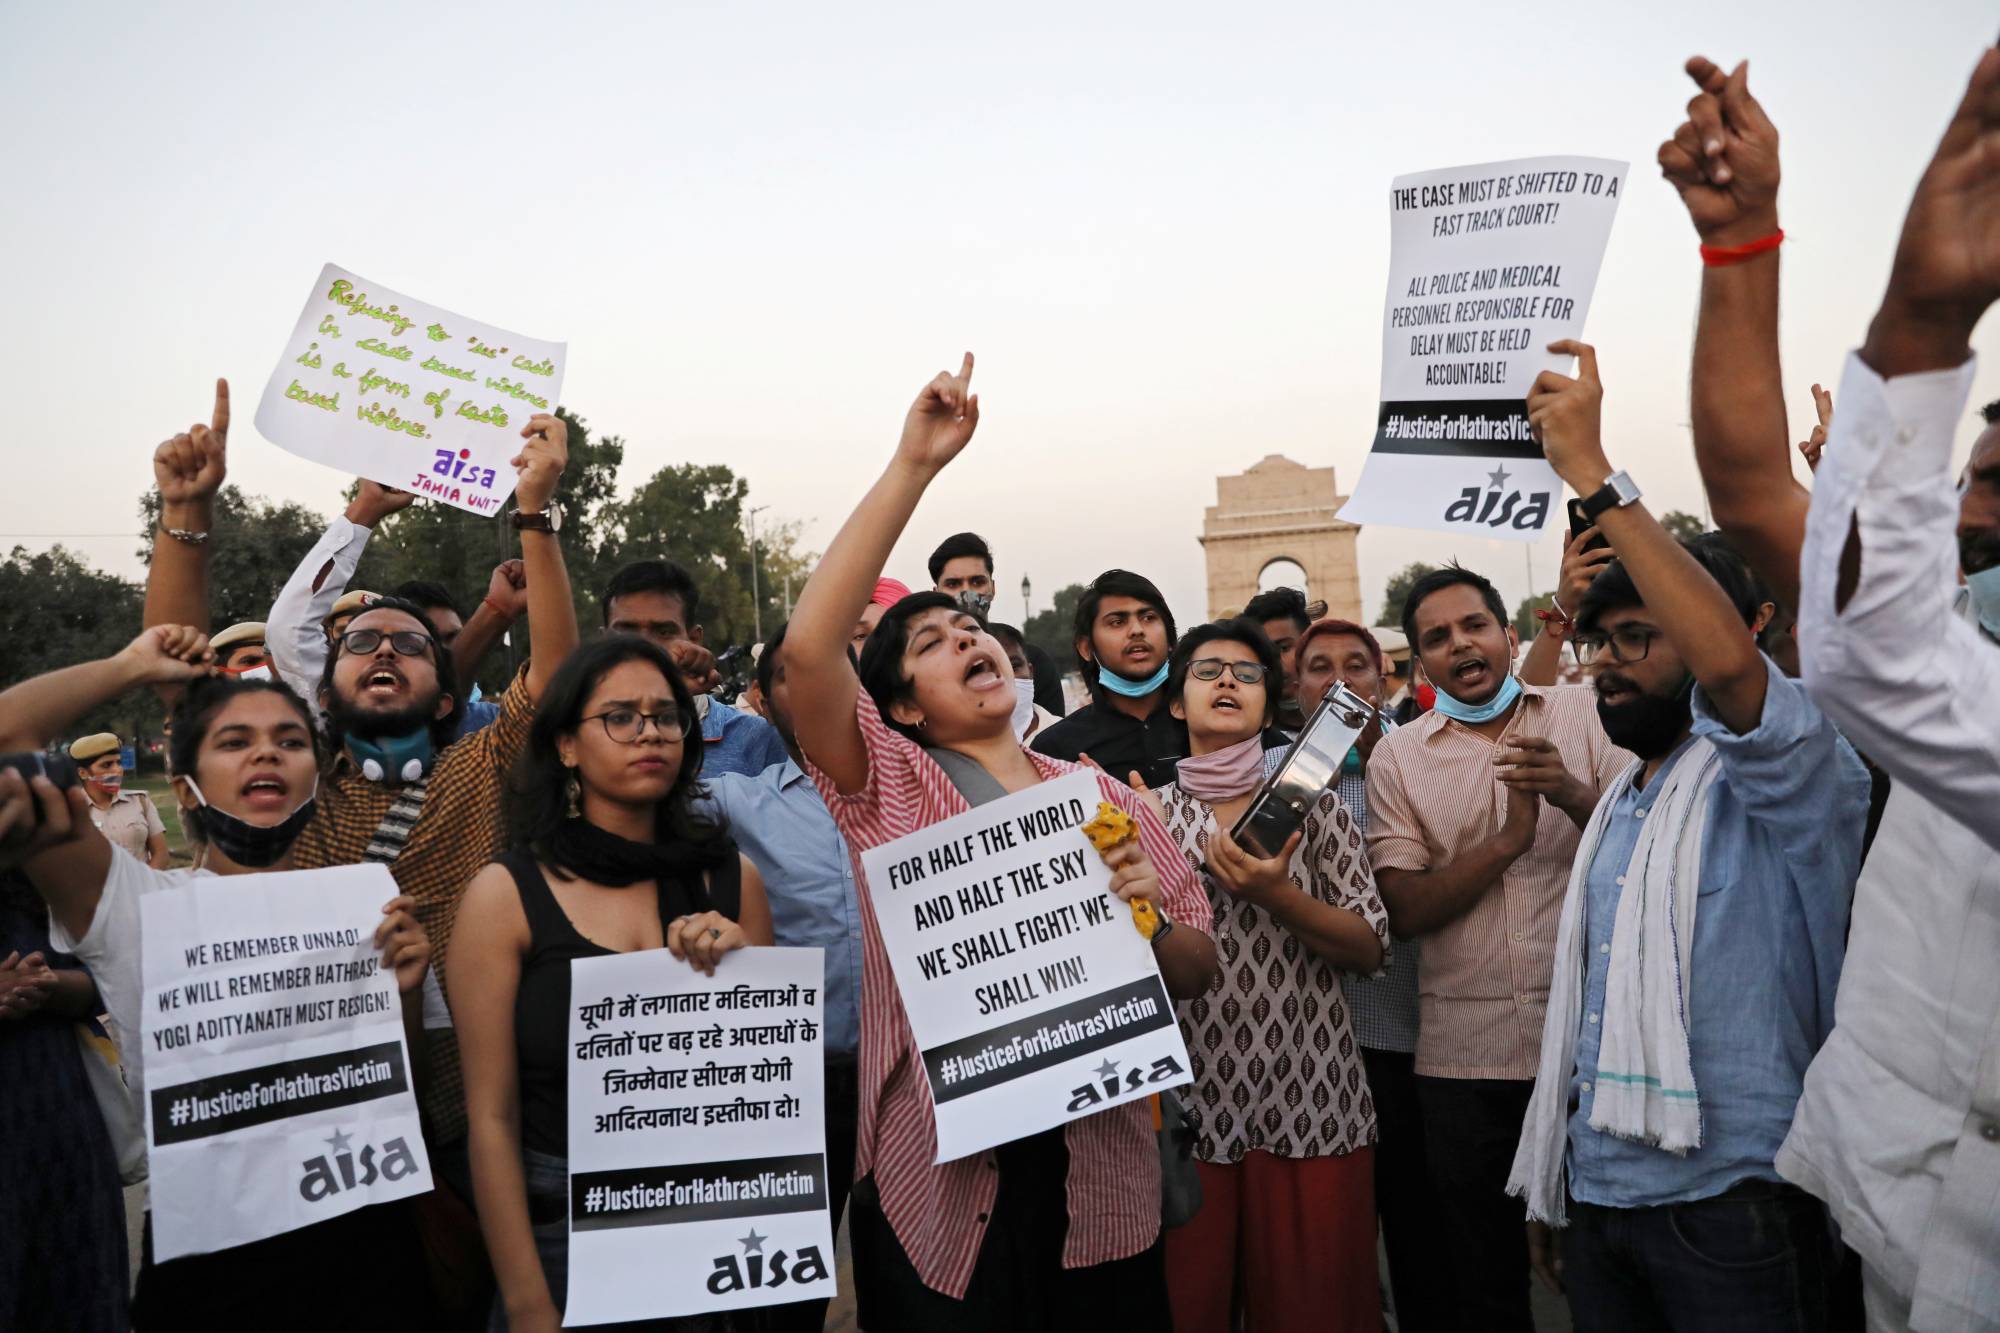 Woman dies in New Delhi after gang rape, fueling outrage again in India hq nude pic